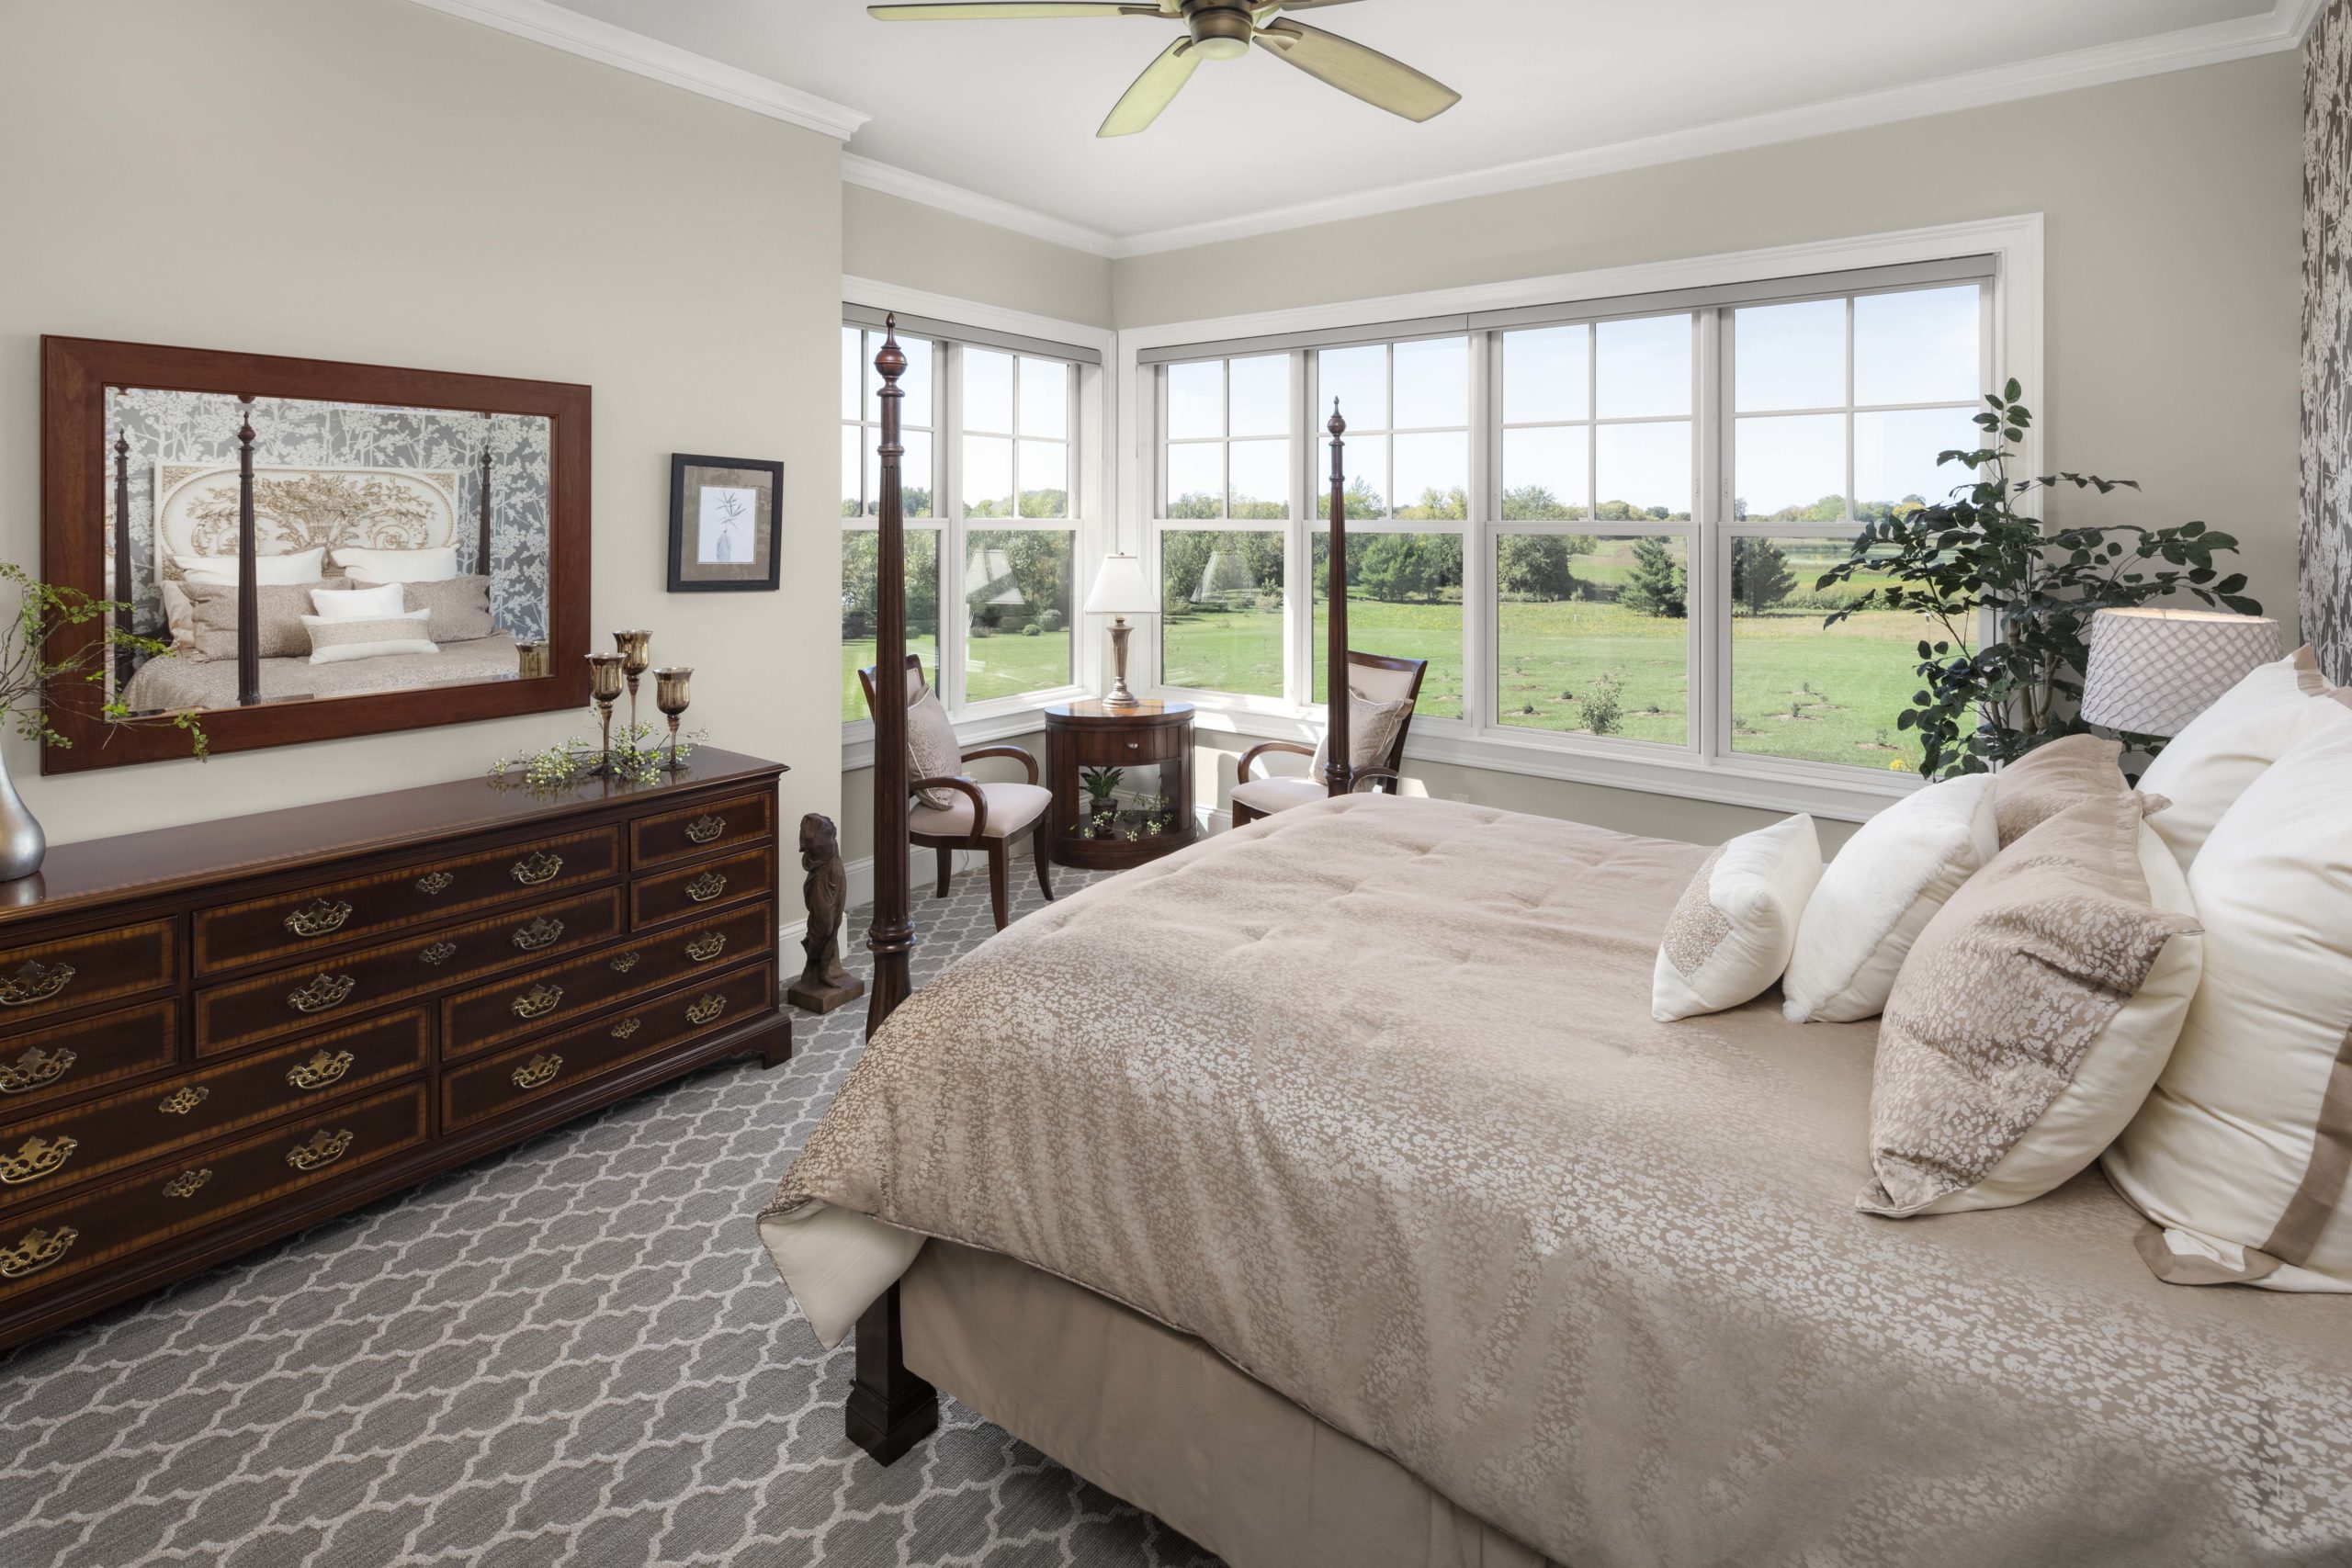 A prairie transitional bedroom with a bed and dresser.